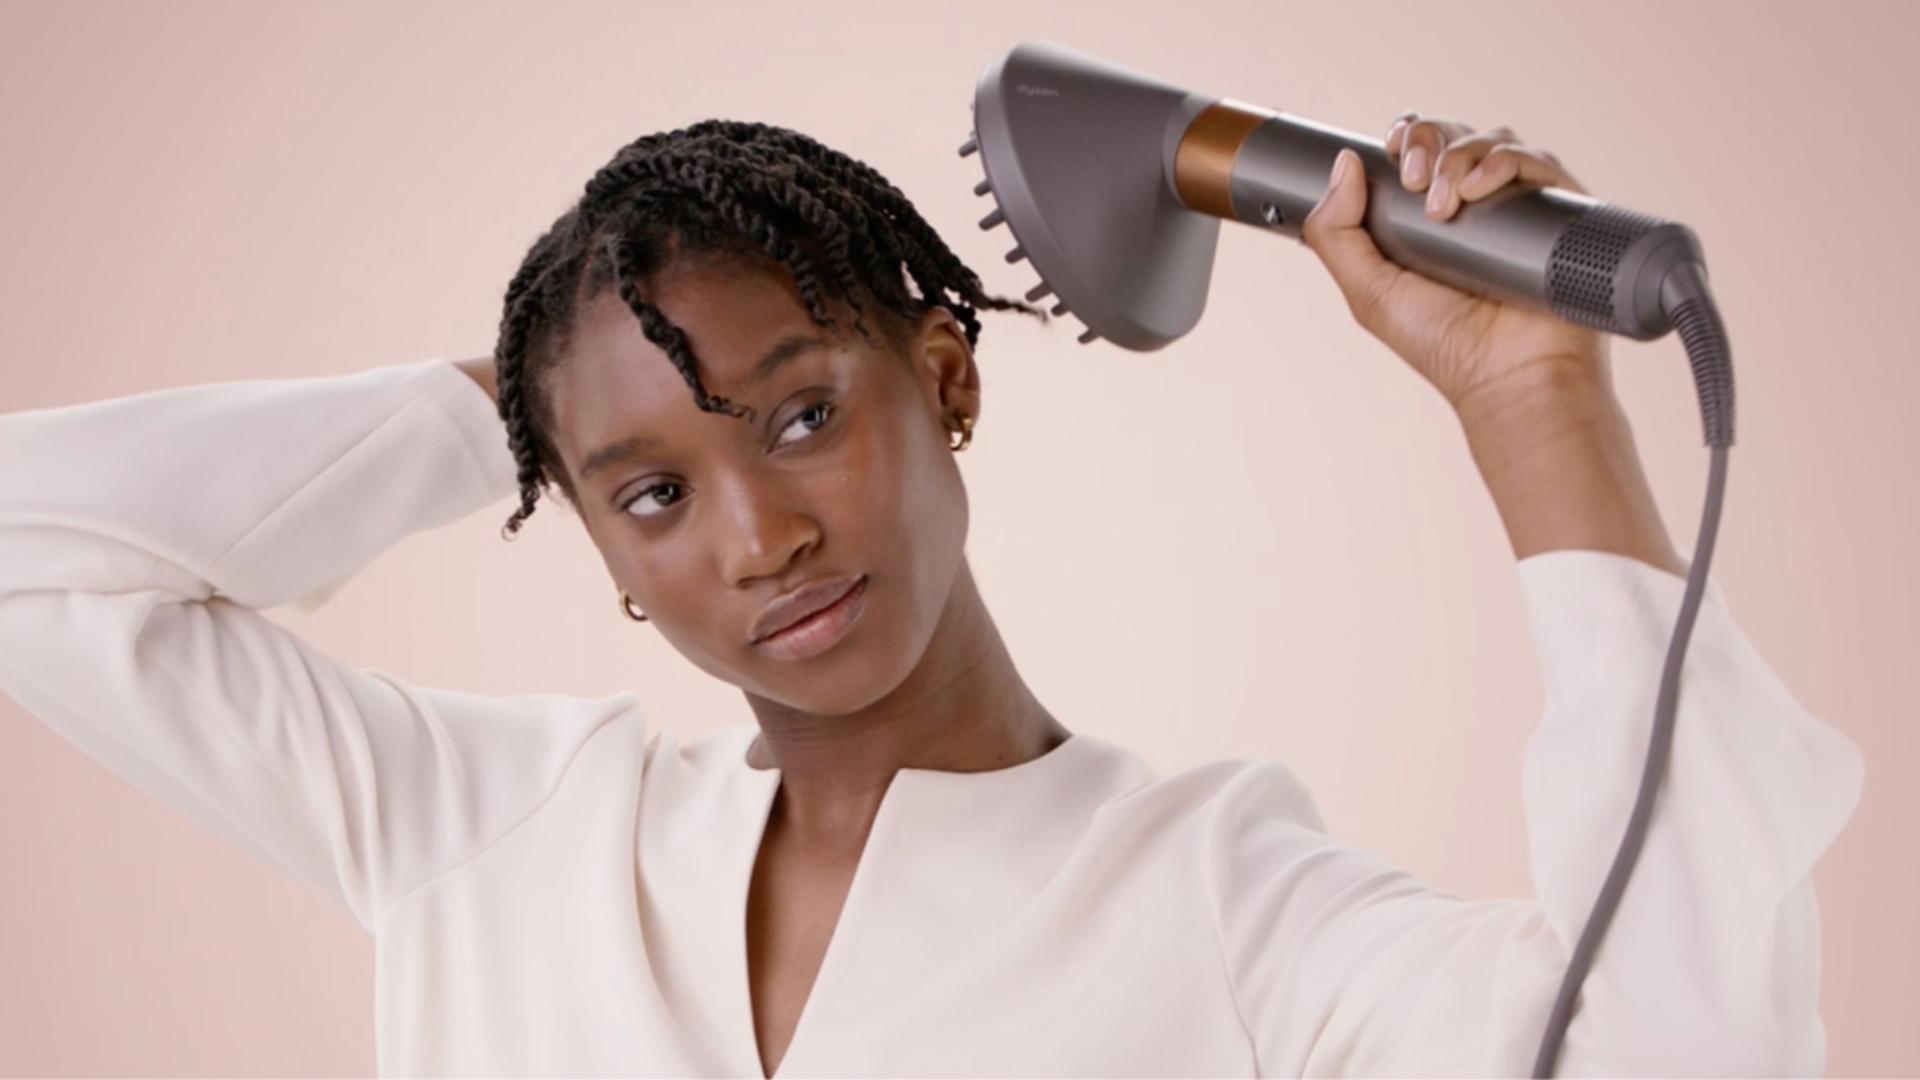 A model styling their hair with the Diffuser attachment.